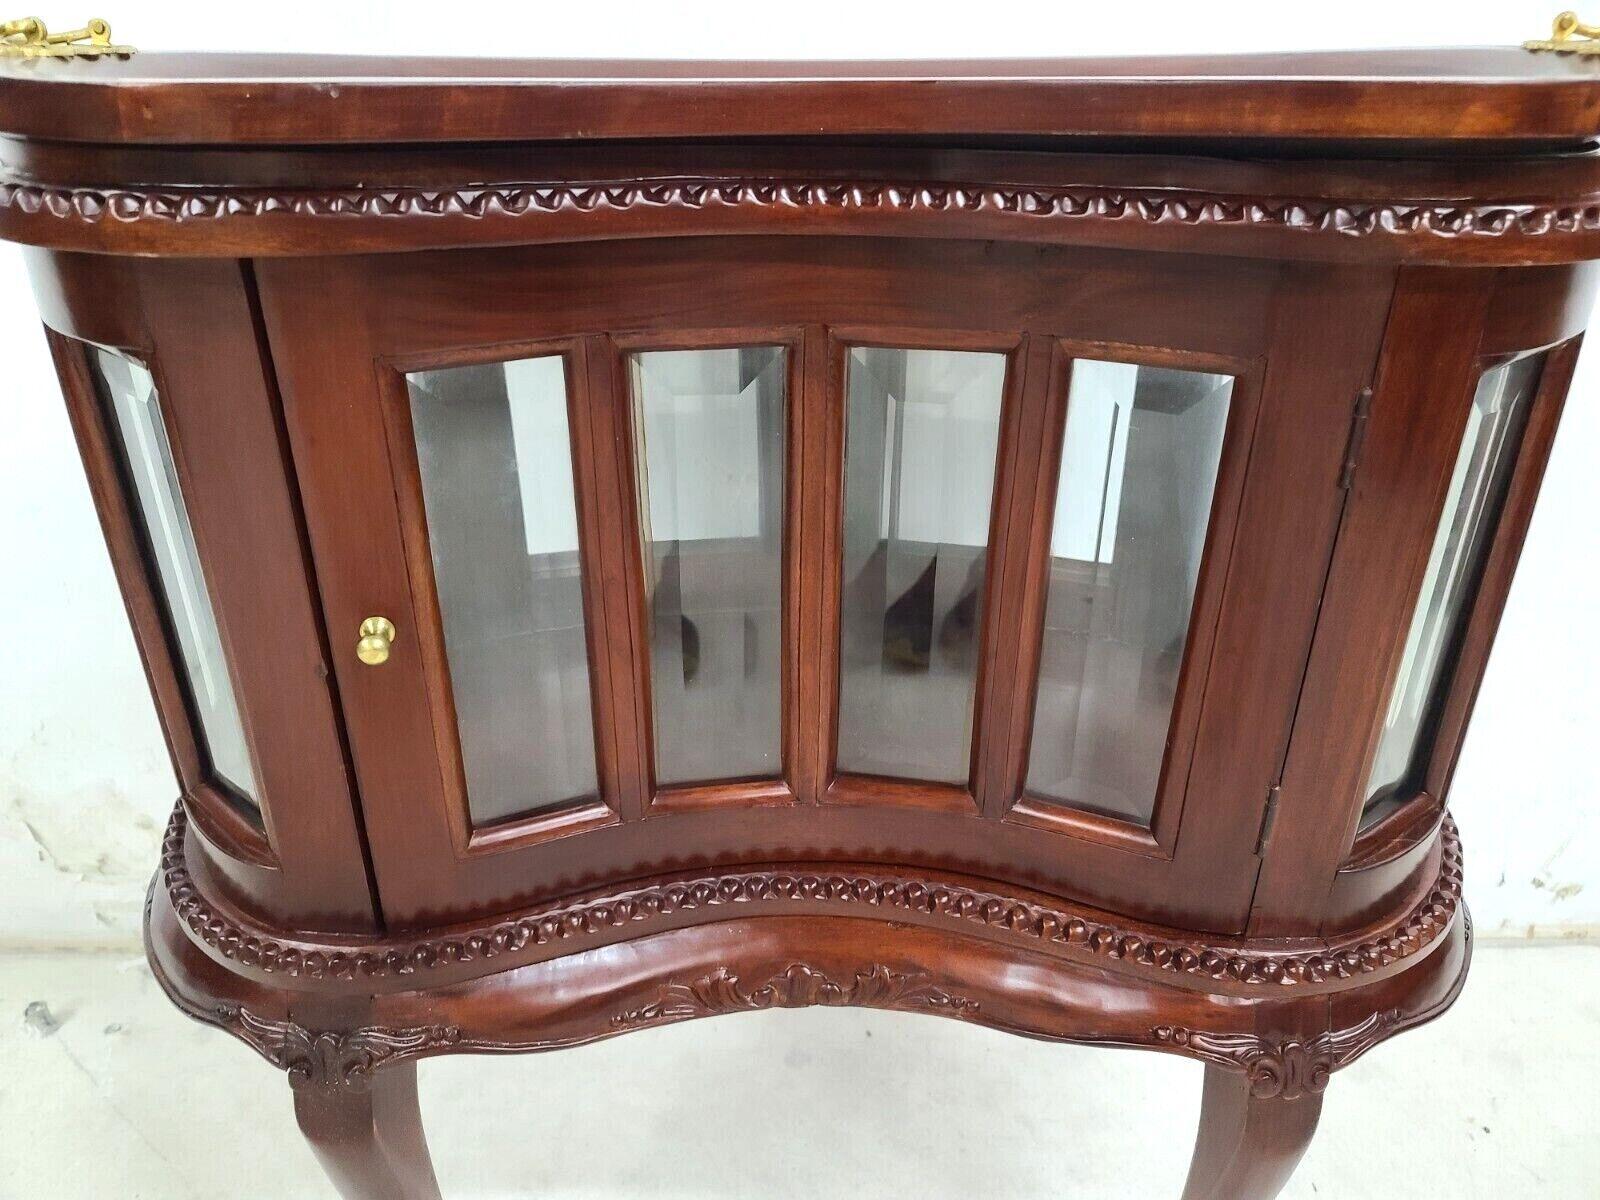 20th Century Vintage Kidney Shaped Mahogany Dry Bar with Serving Tray